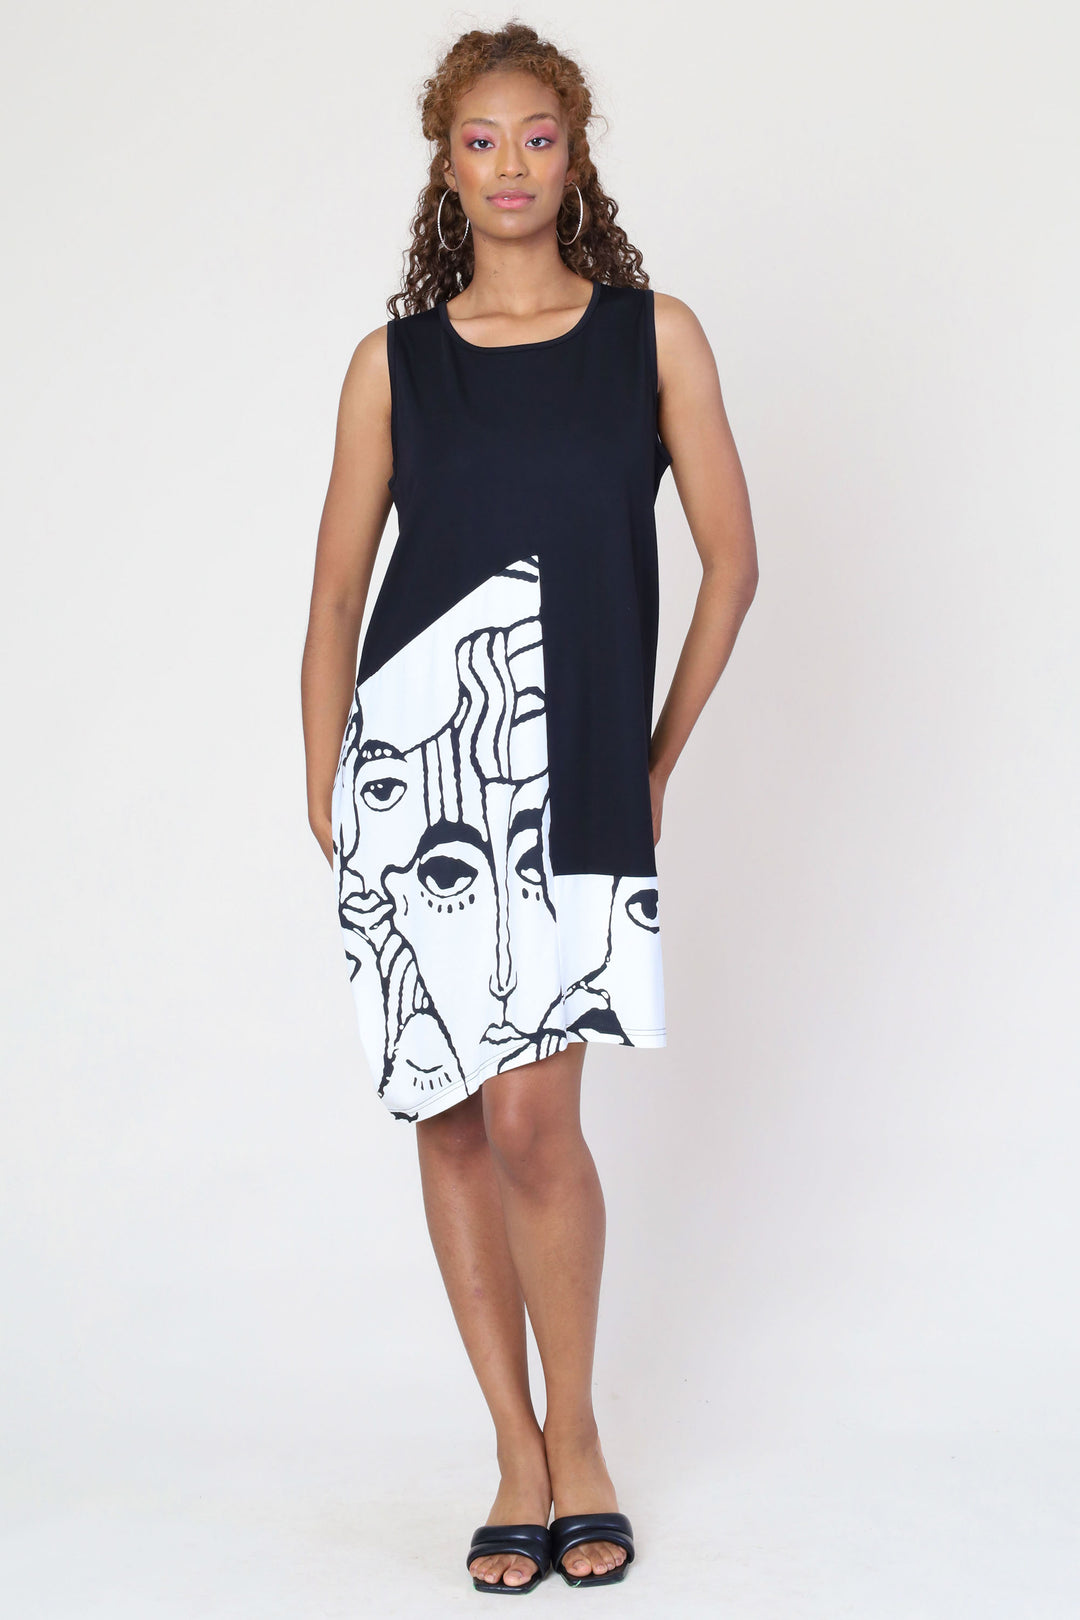 Funsport Summer 2024 Featuring an abstract face print that's sure to turn heads and a flattering boat neckline. The uneven double stitch hem adds a playful twist to this knee-length dress